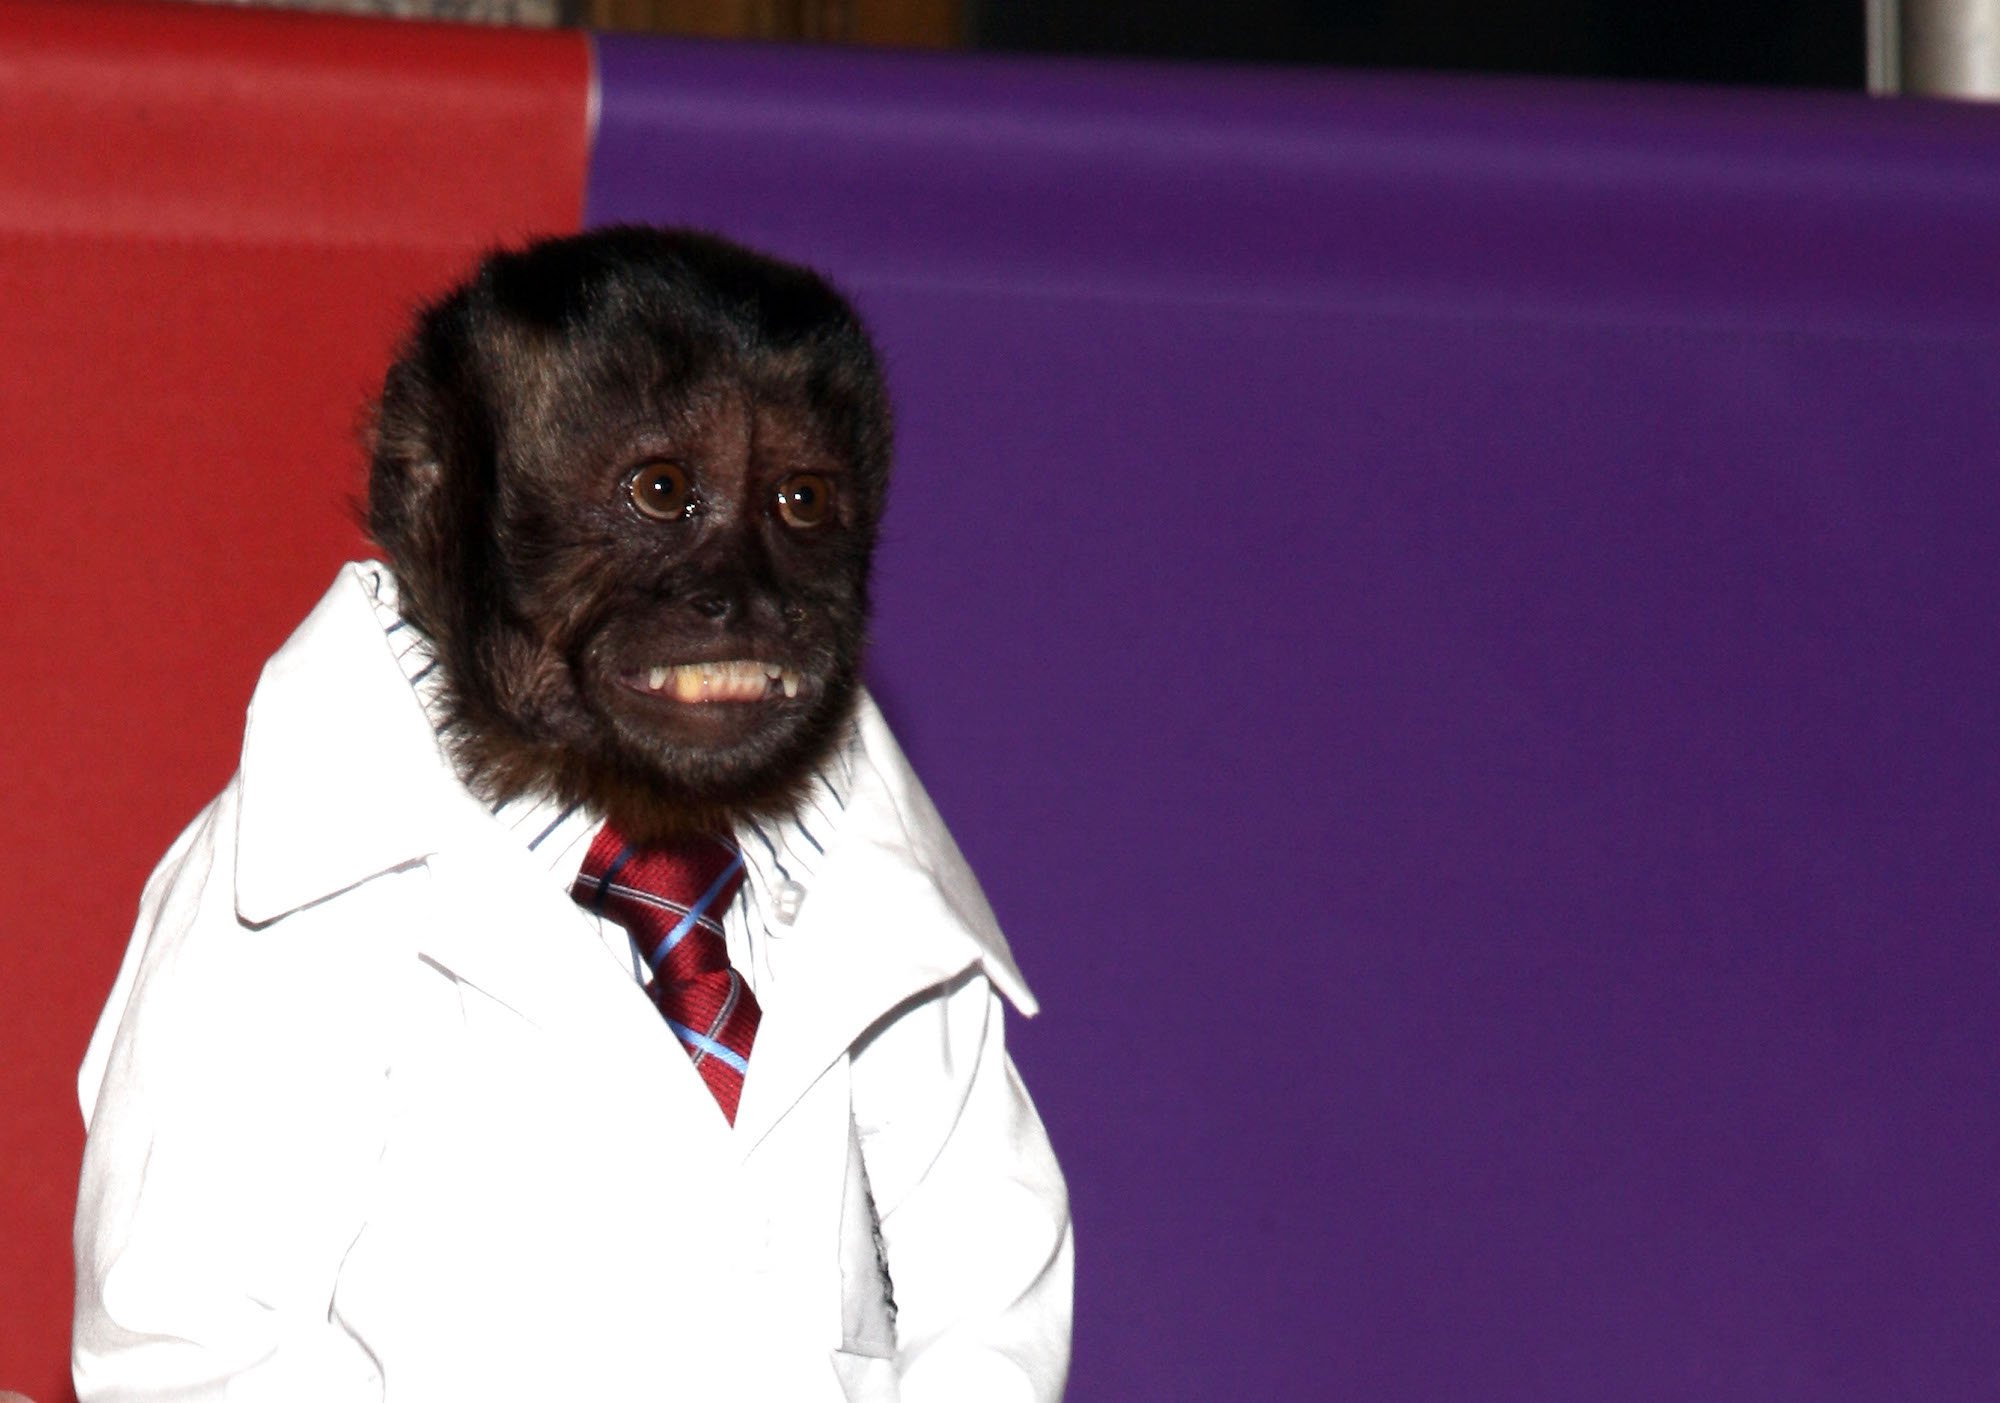 The Monkey From ‘Community’ and ‘The Hangover Part II’ Makes an Insane $12,000 Per Episode